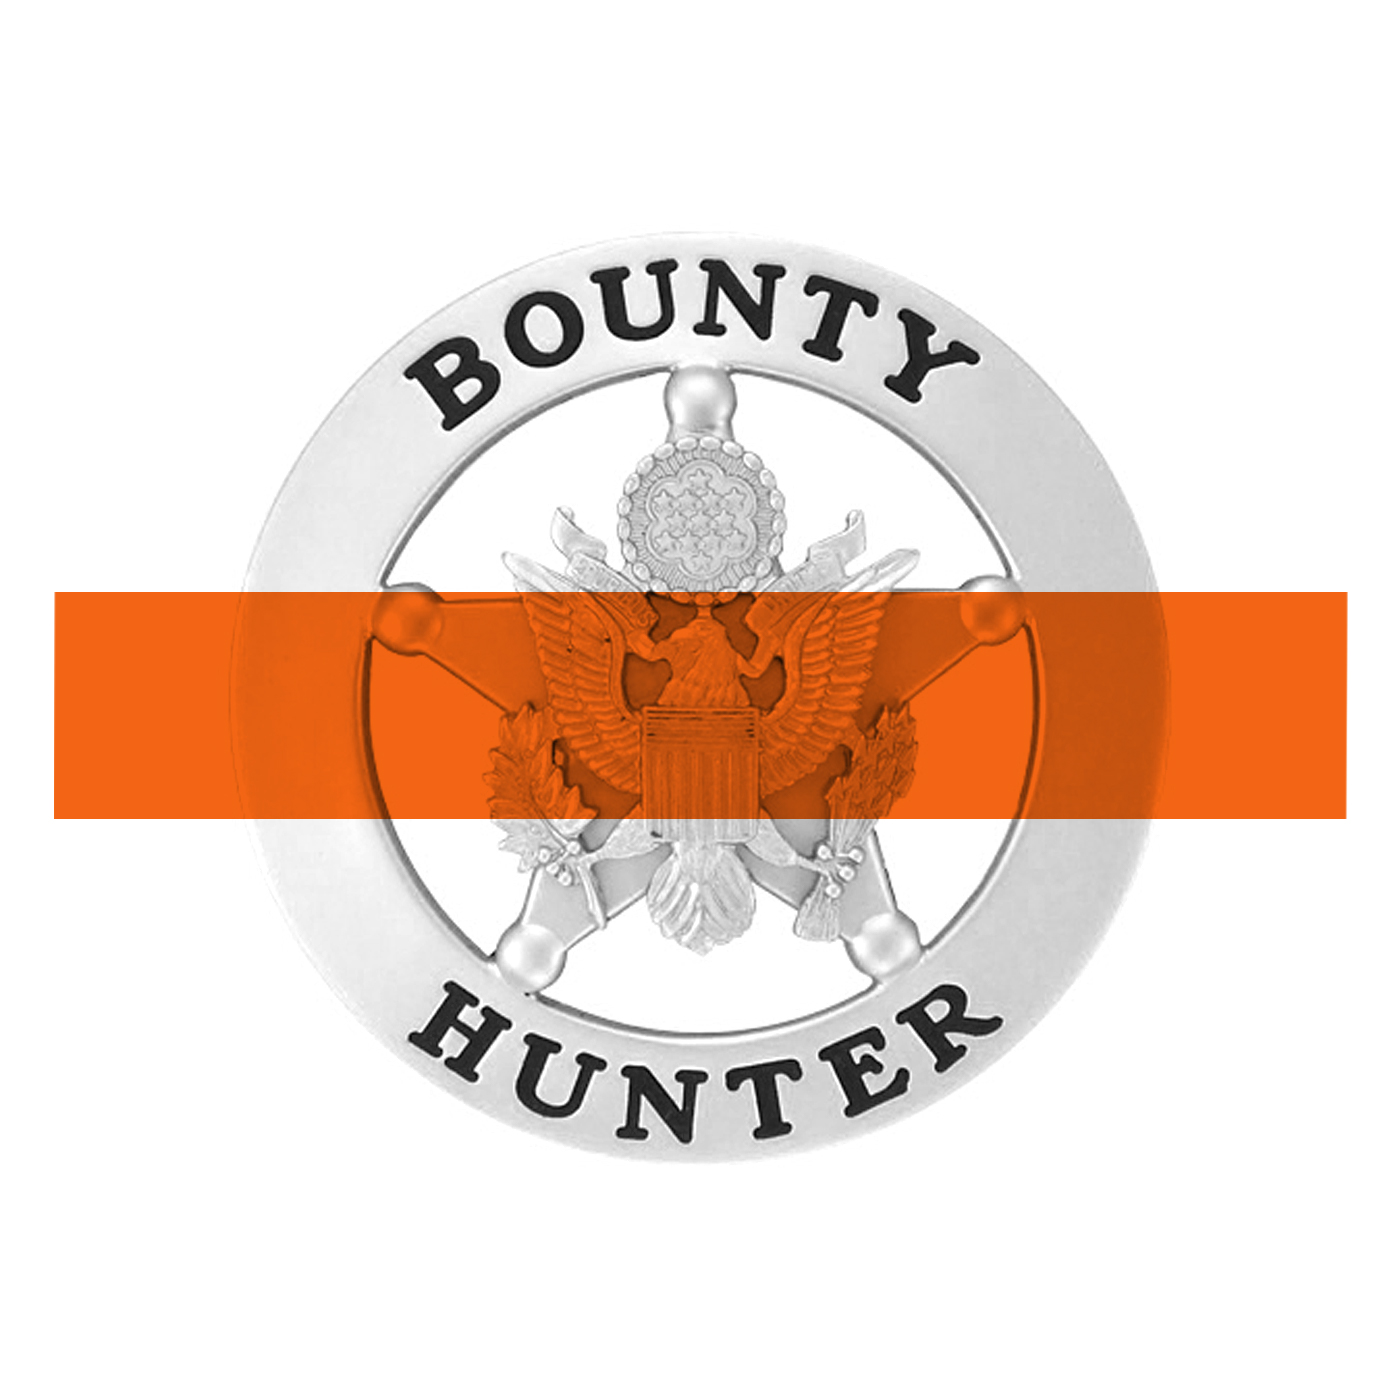 The Bounty Hunter-Part 1 Jack Saltarelli was once a fugitive running from FBI. Now he's bounty hunter.